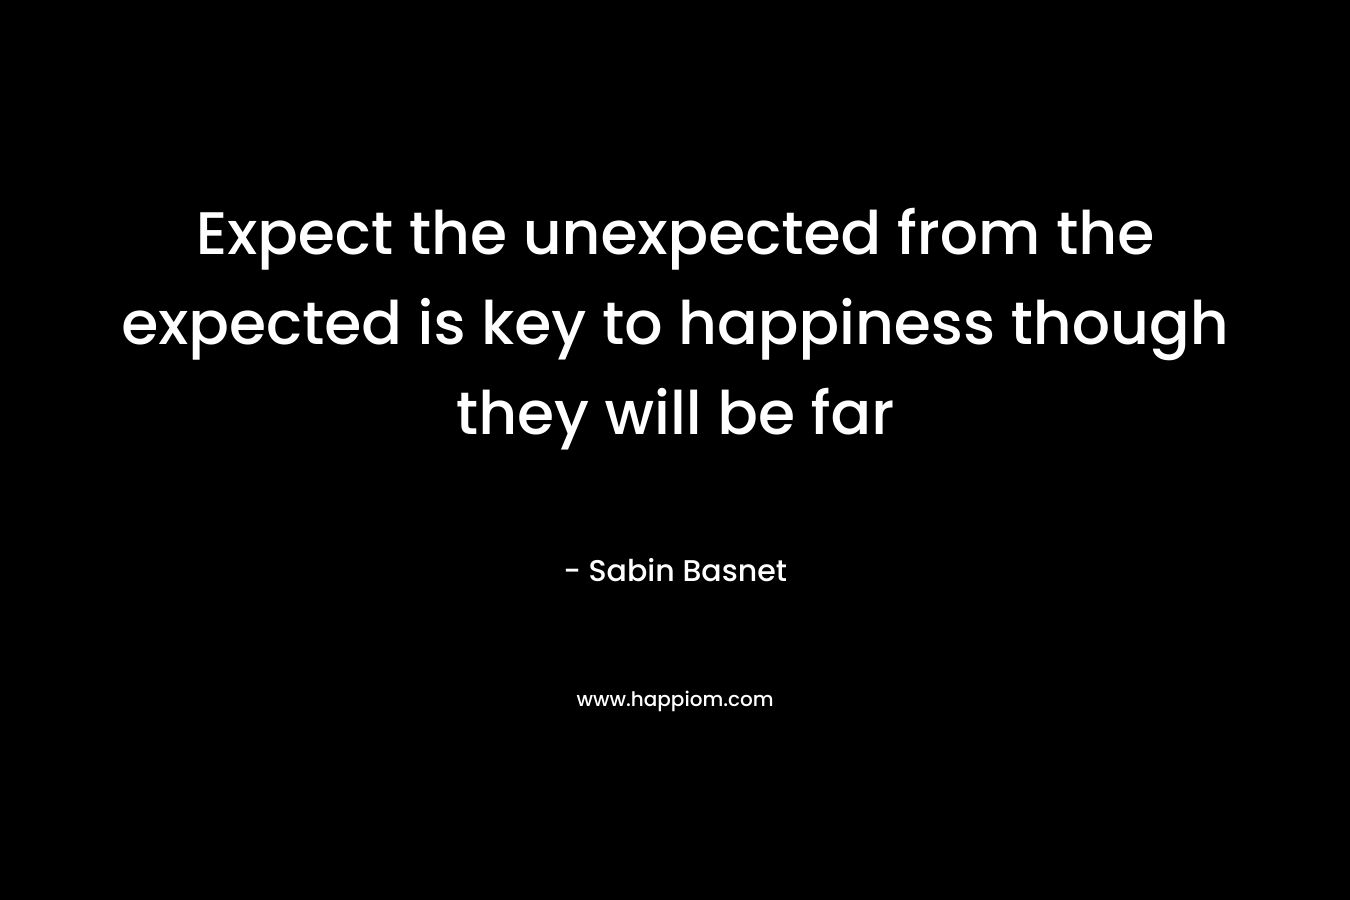 Expect the unexpected from the expected is key to happiness though they will be far